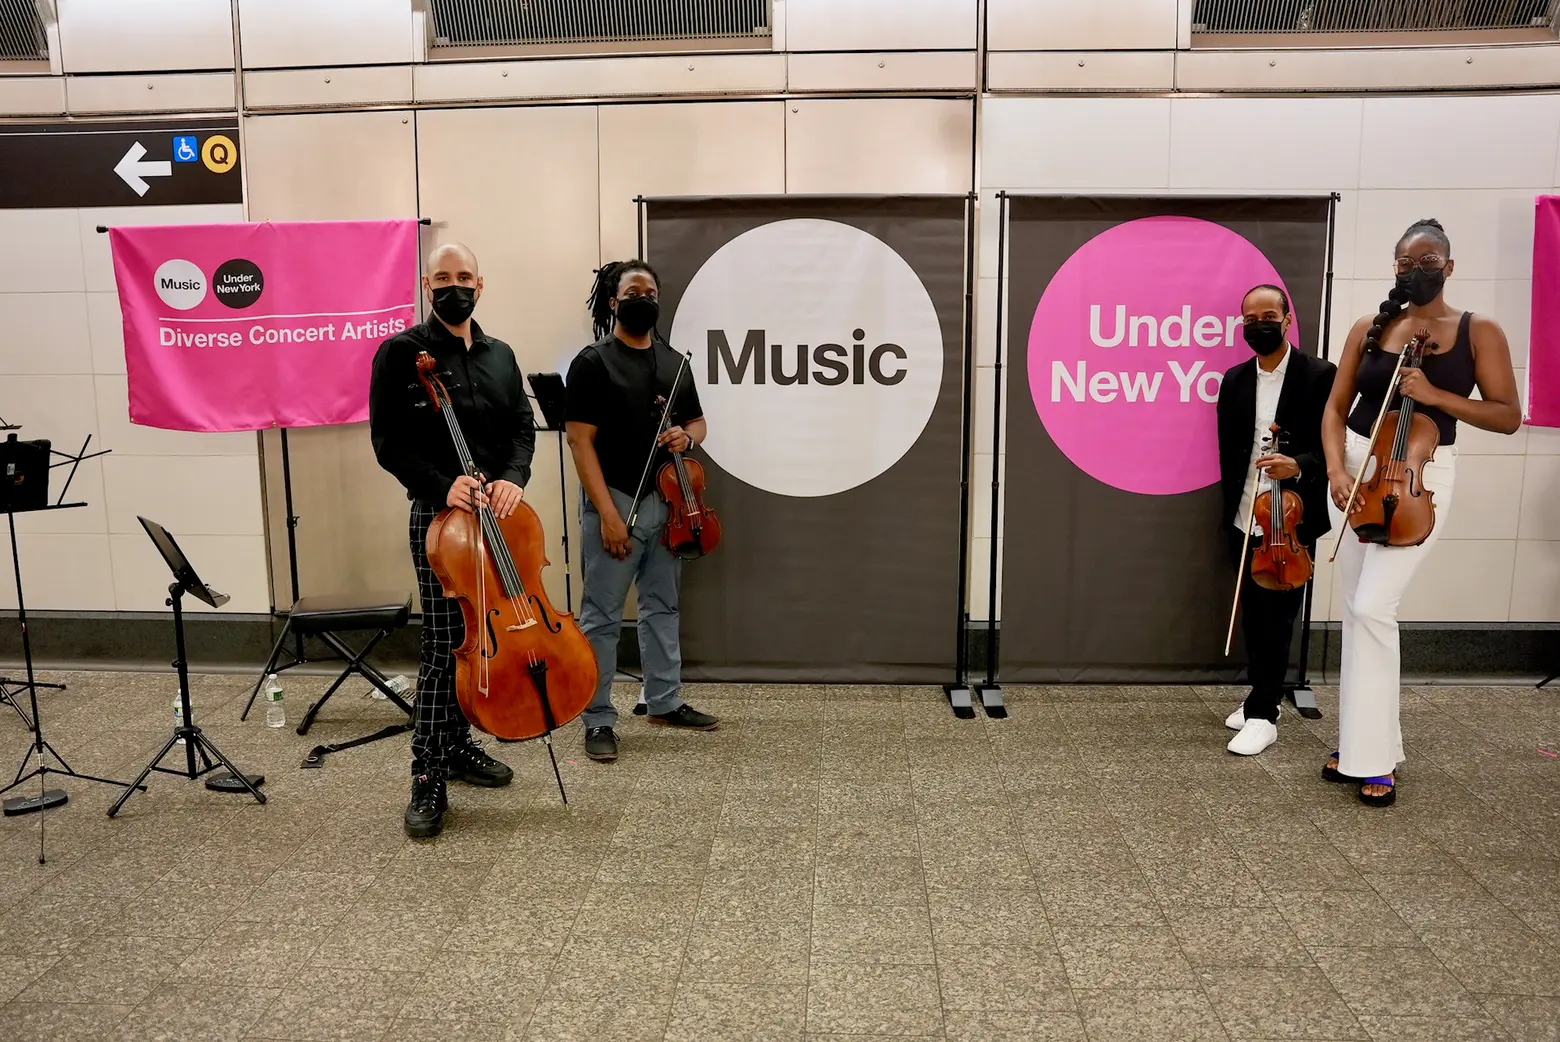 Live performances return to the subway as part of ‘Music Under New York’ program